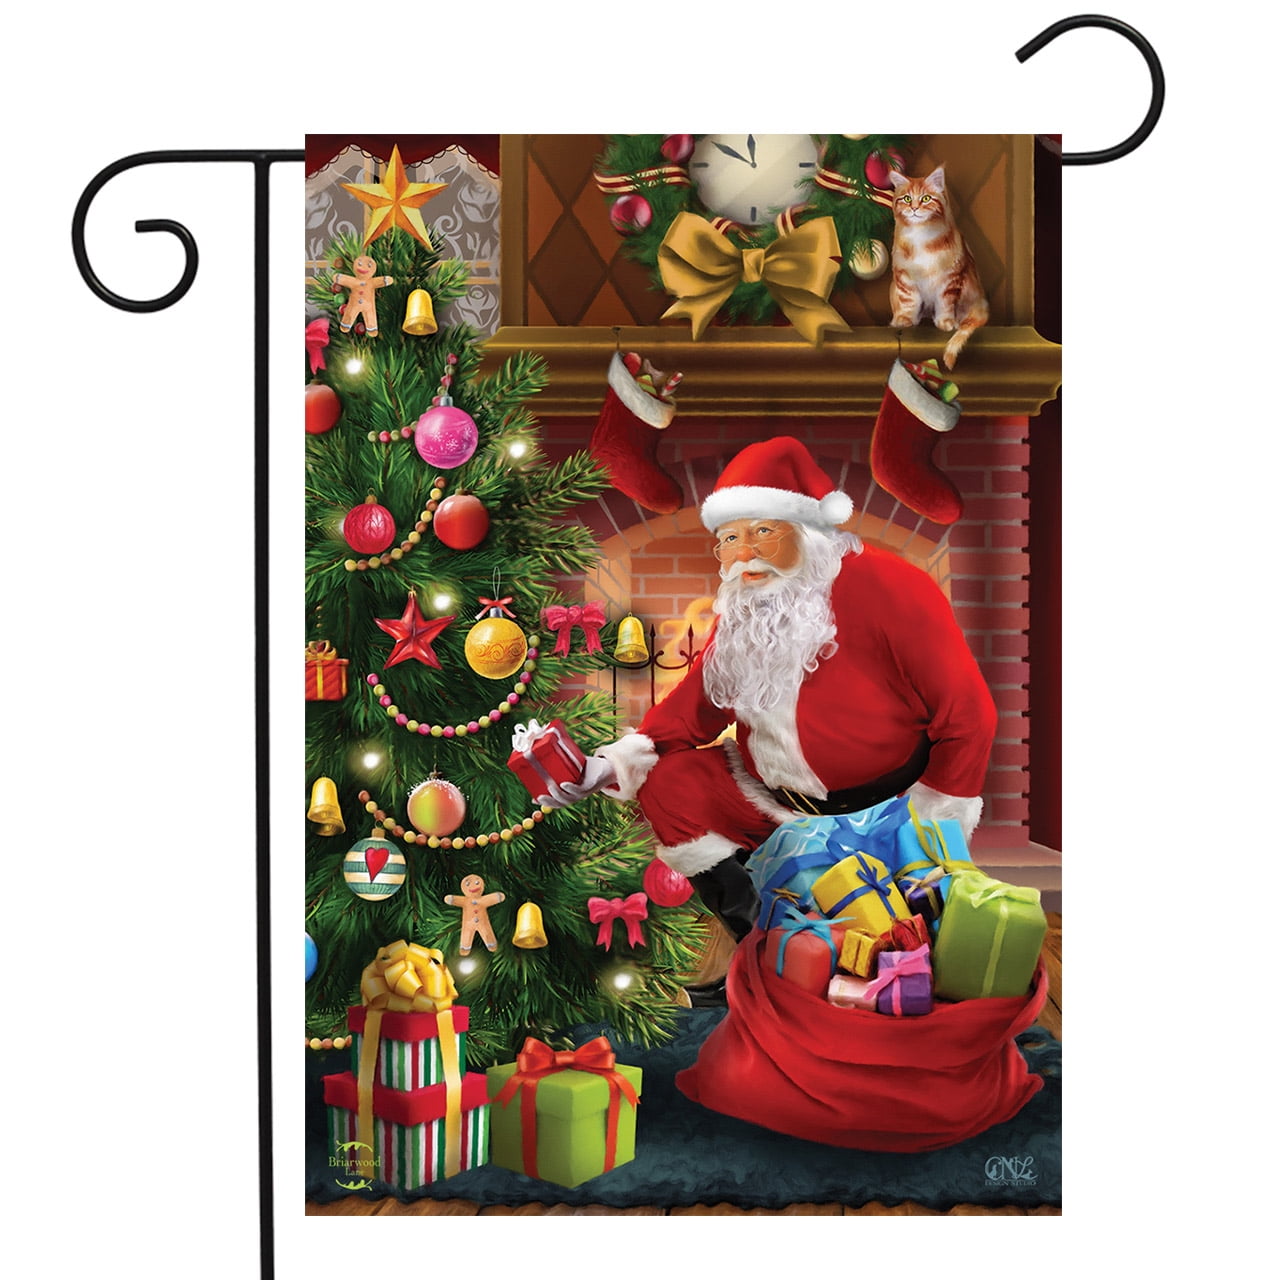 SANTAS BOOTS FILLED with Gifts CHRISTMAS Holiday 12.5" x 18" Small Banner Flag 